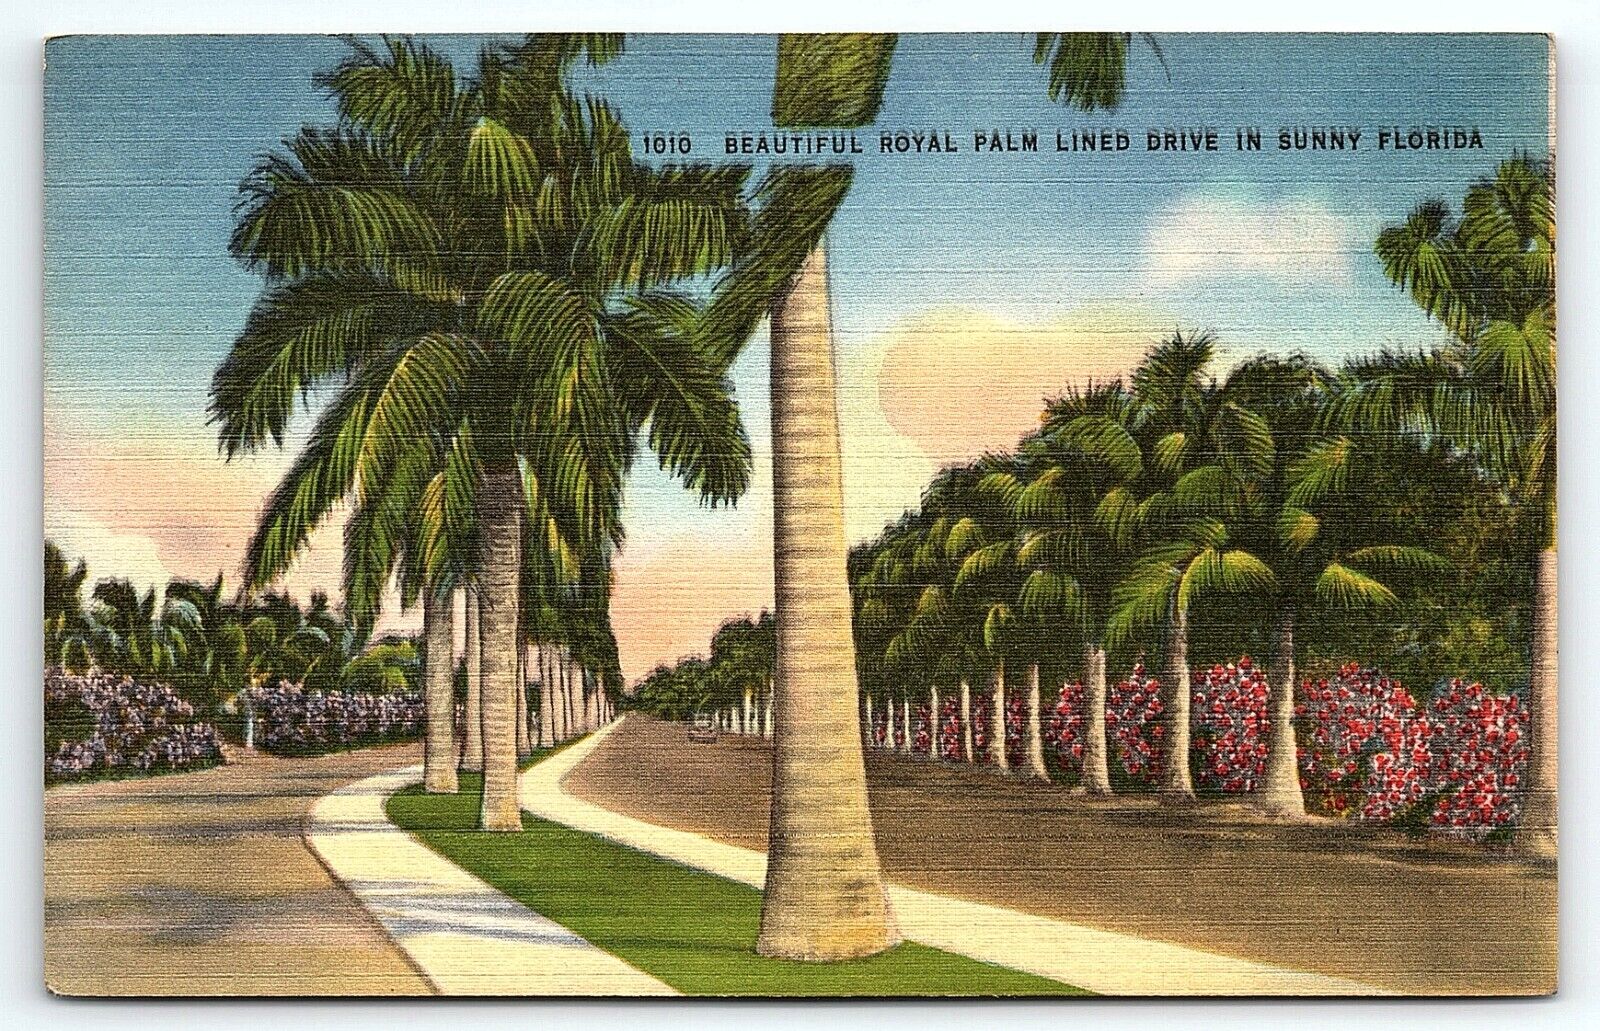 1940s BEAUTIFUL ROYAL PALM LINED DRIVE IN SUNNY FLORIDA LINEN POSTCARD P5323